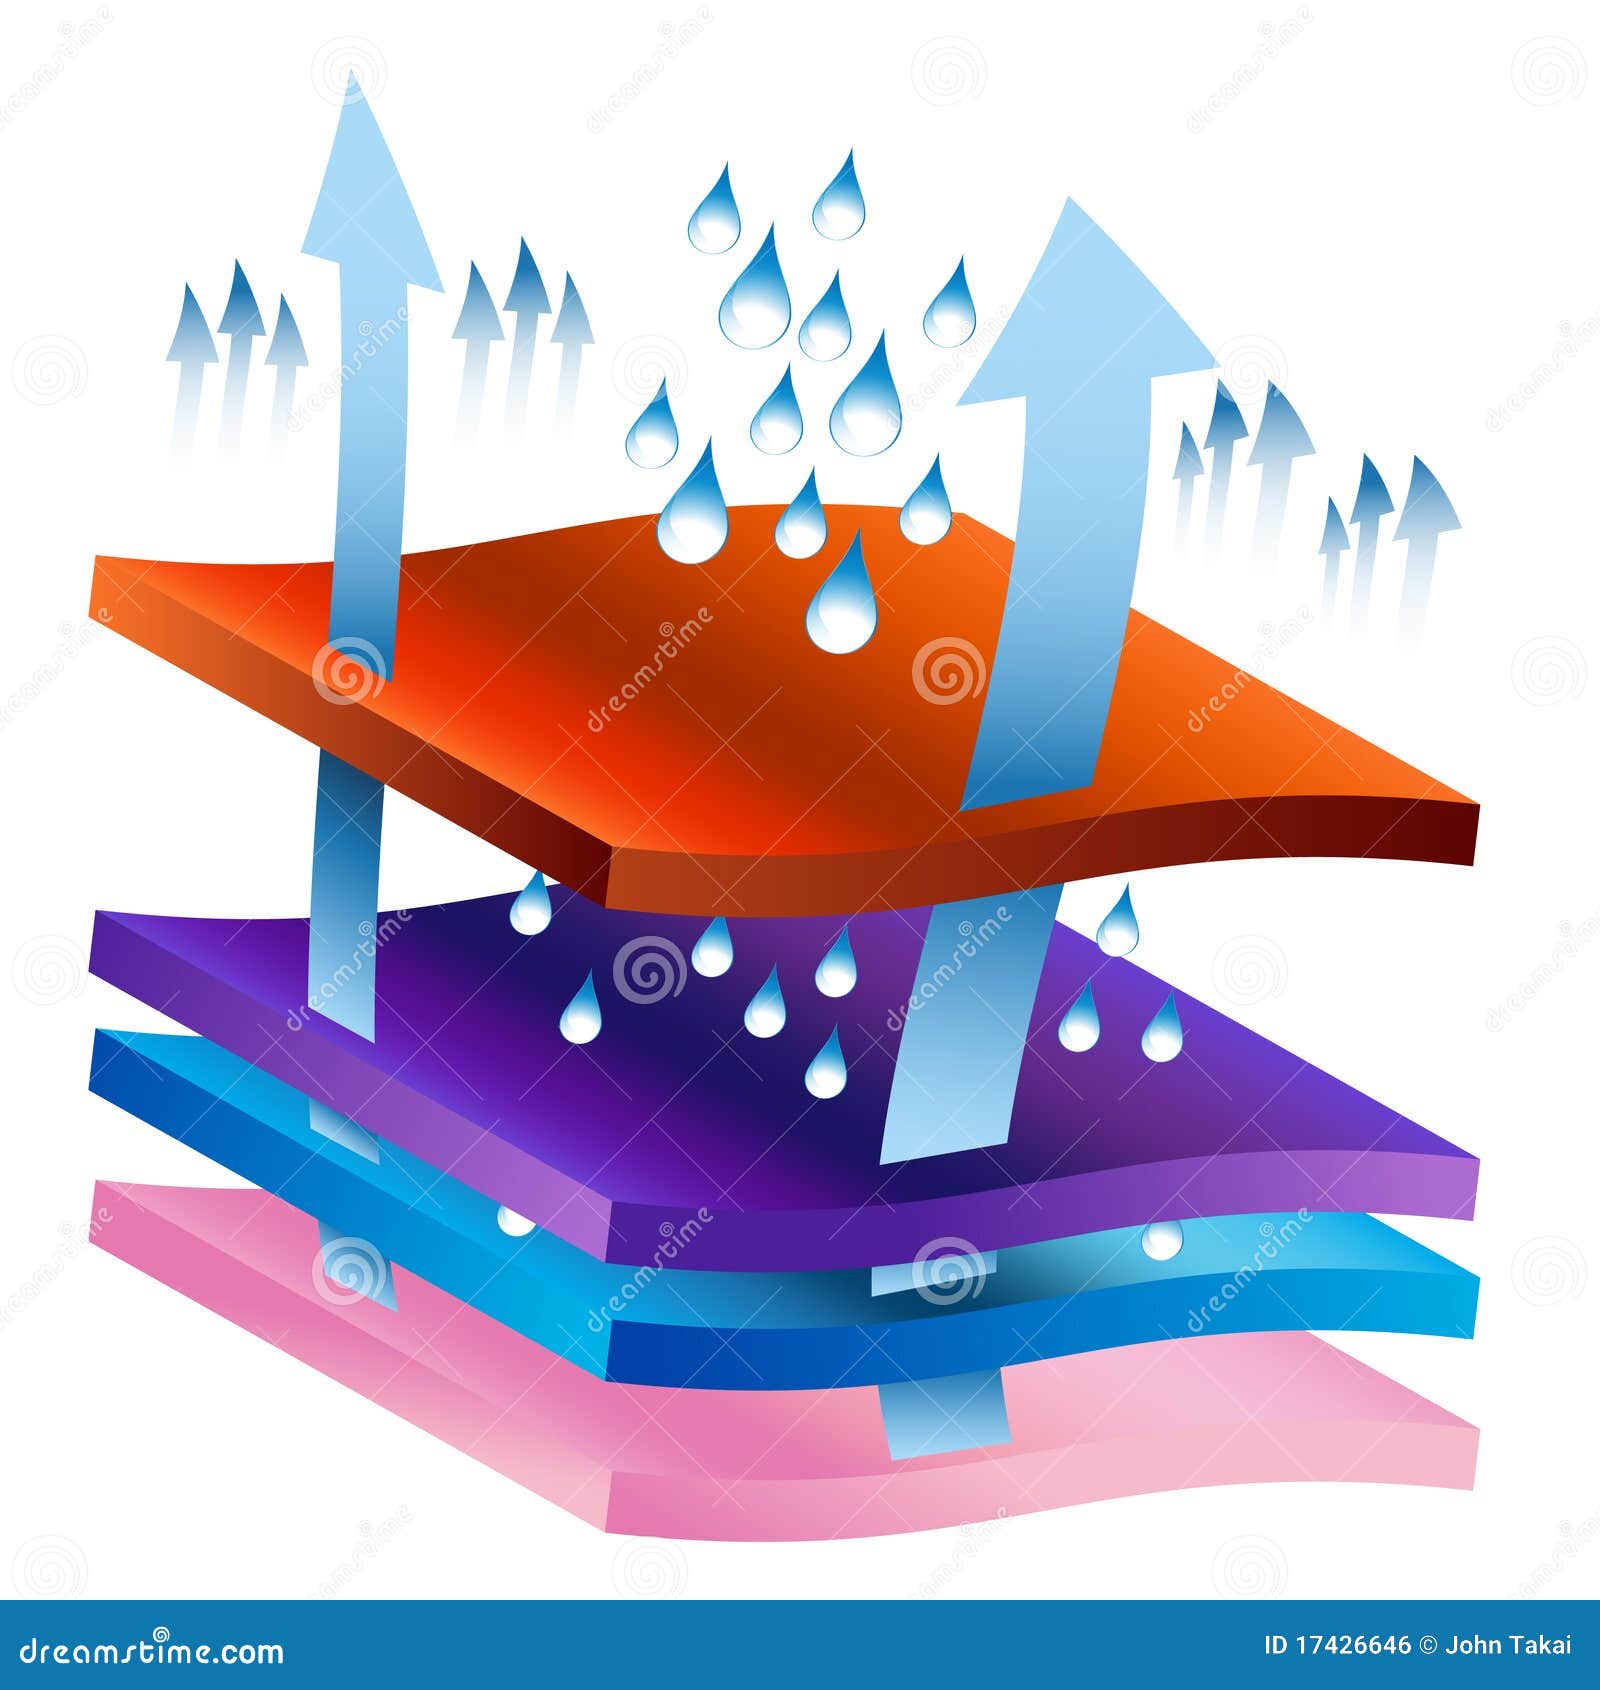 Moisture Wicking Process Chart Stock Vector - Illustration of icon